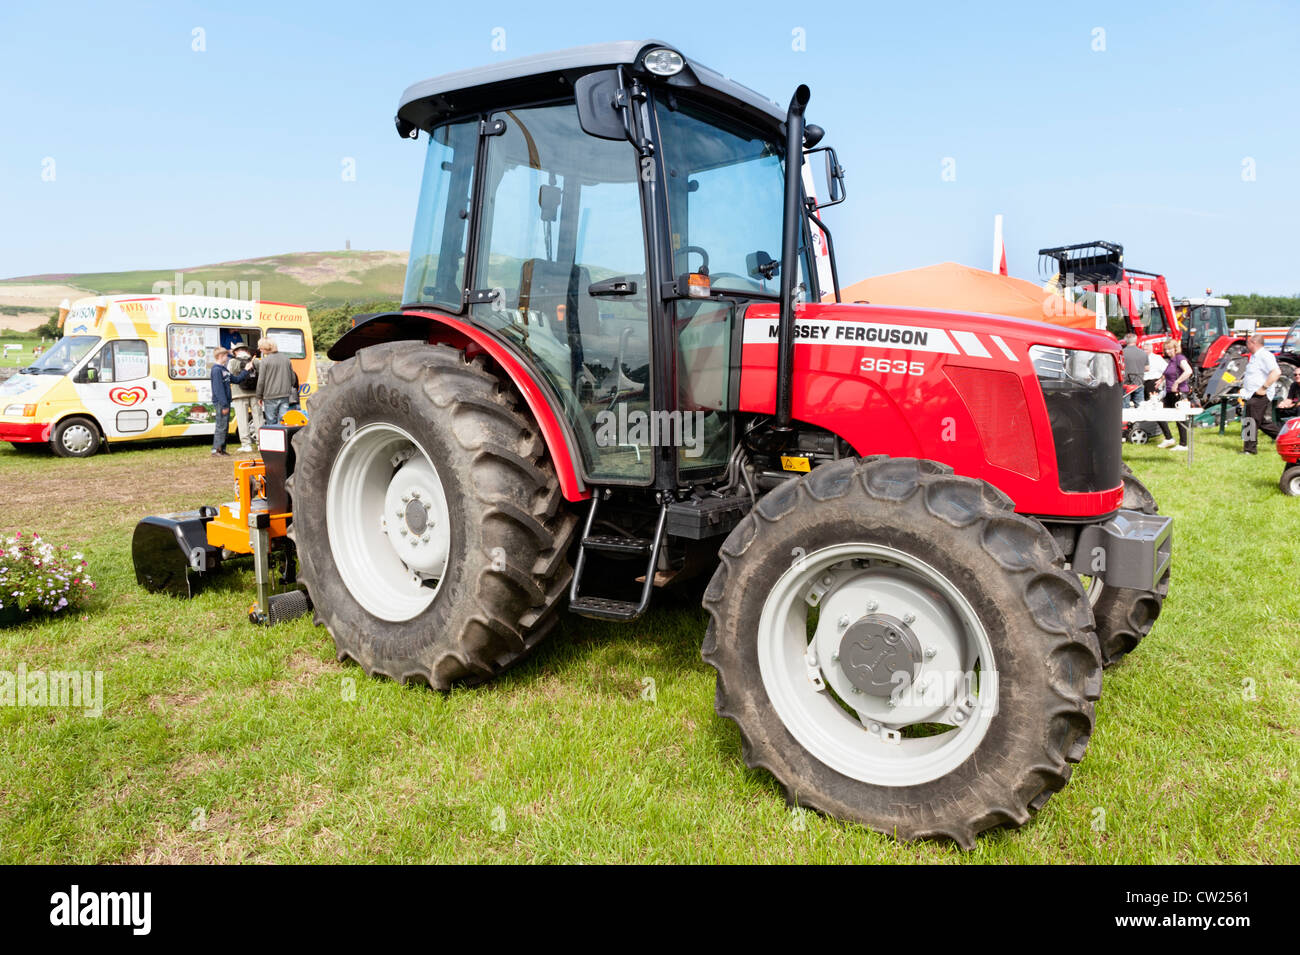 new red Massey Ferguson tractor on display at agricultural show Stock Photo